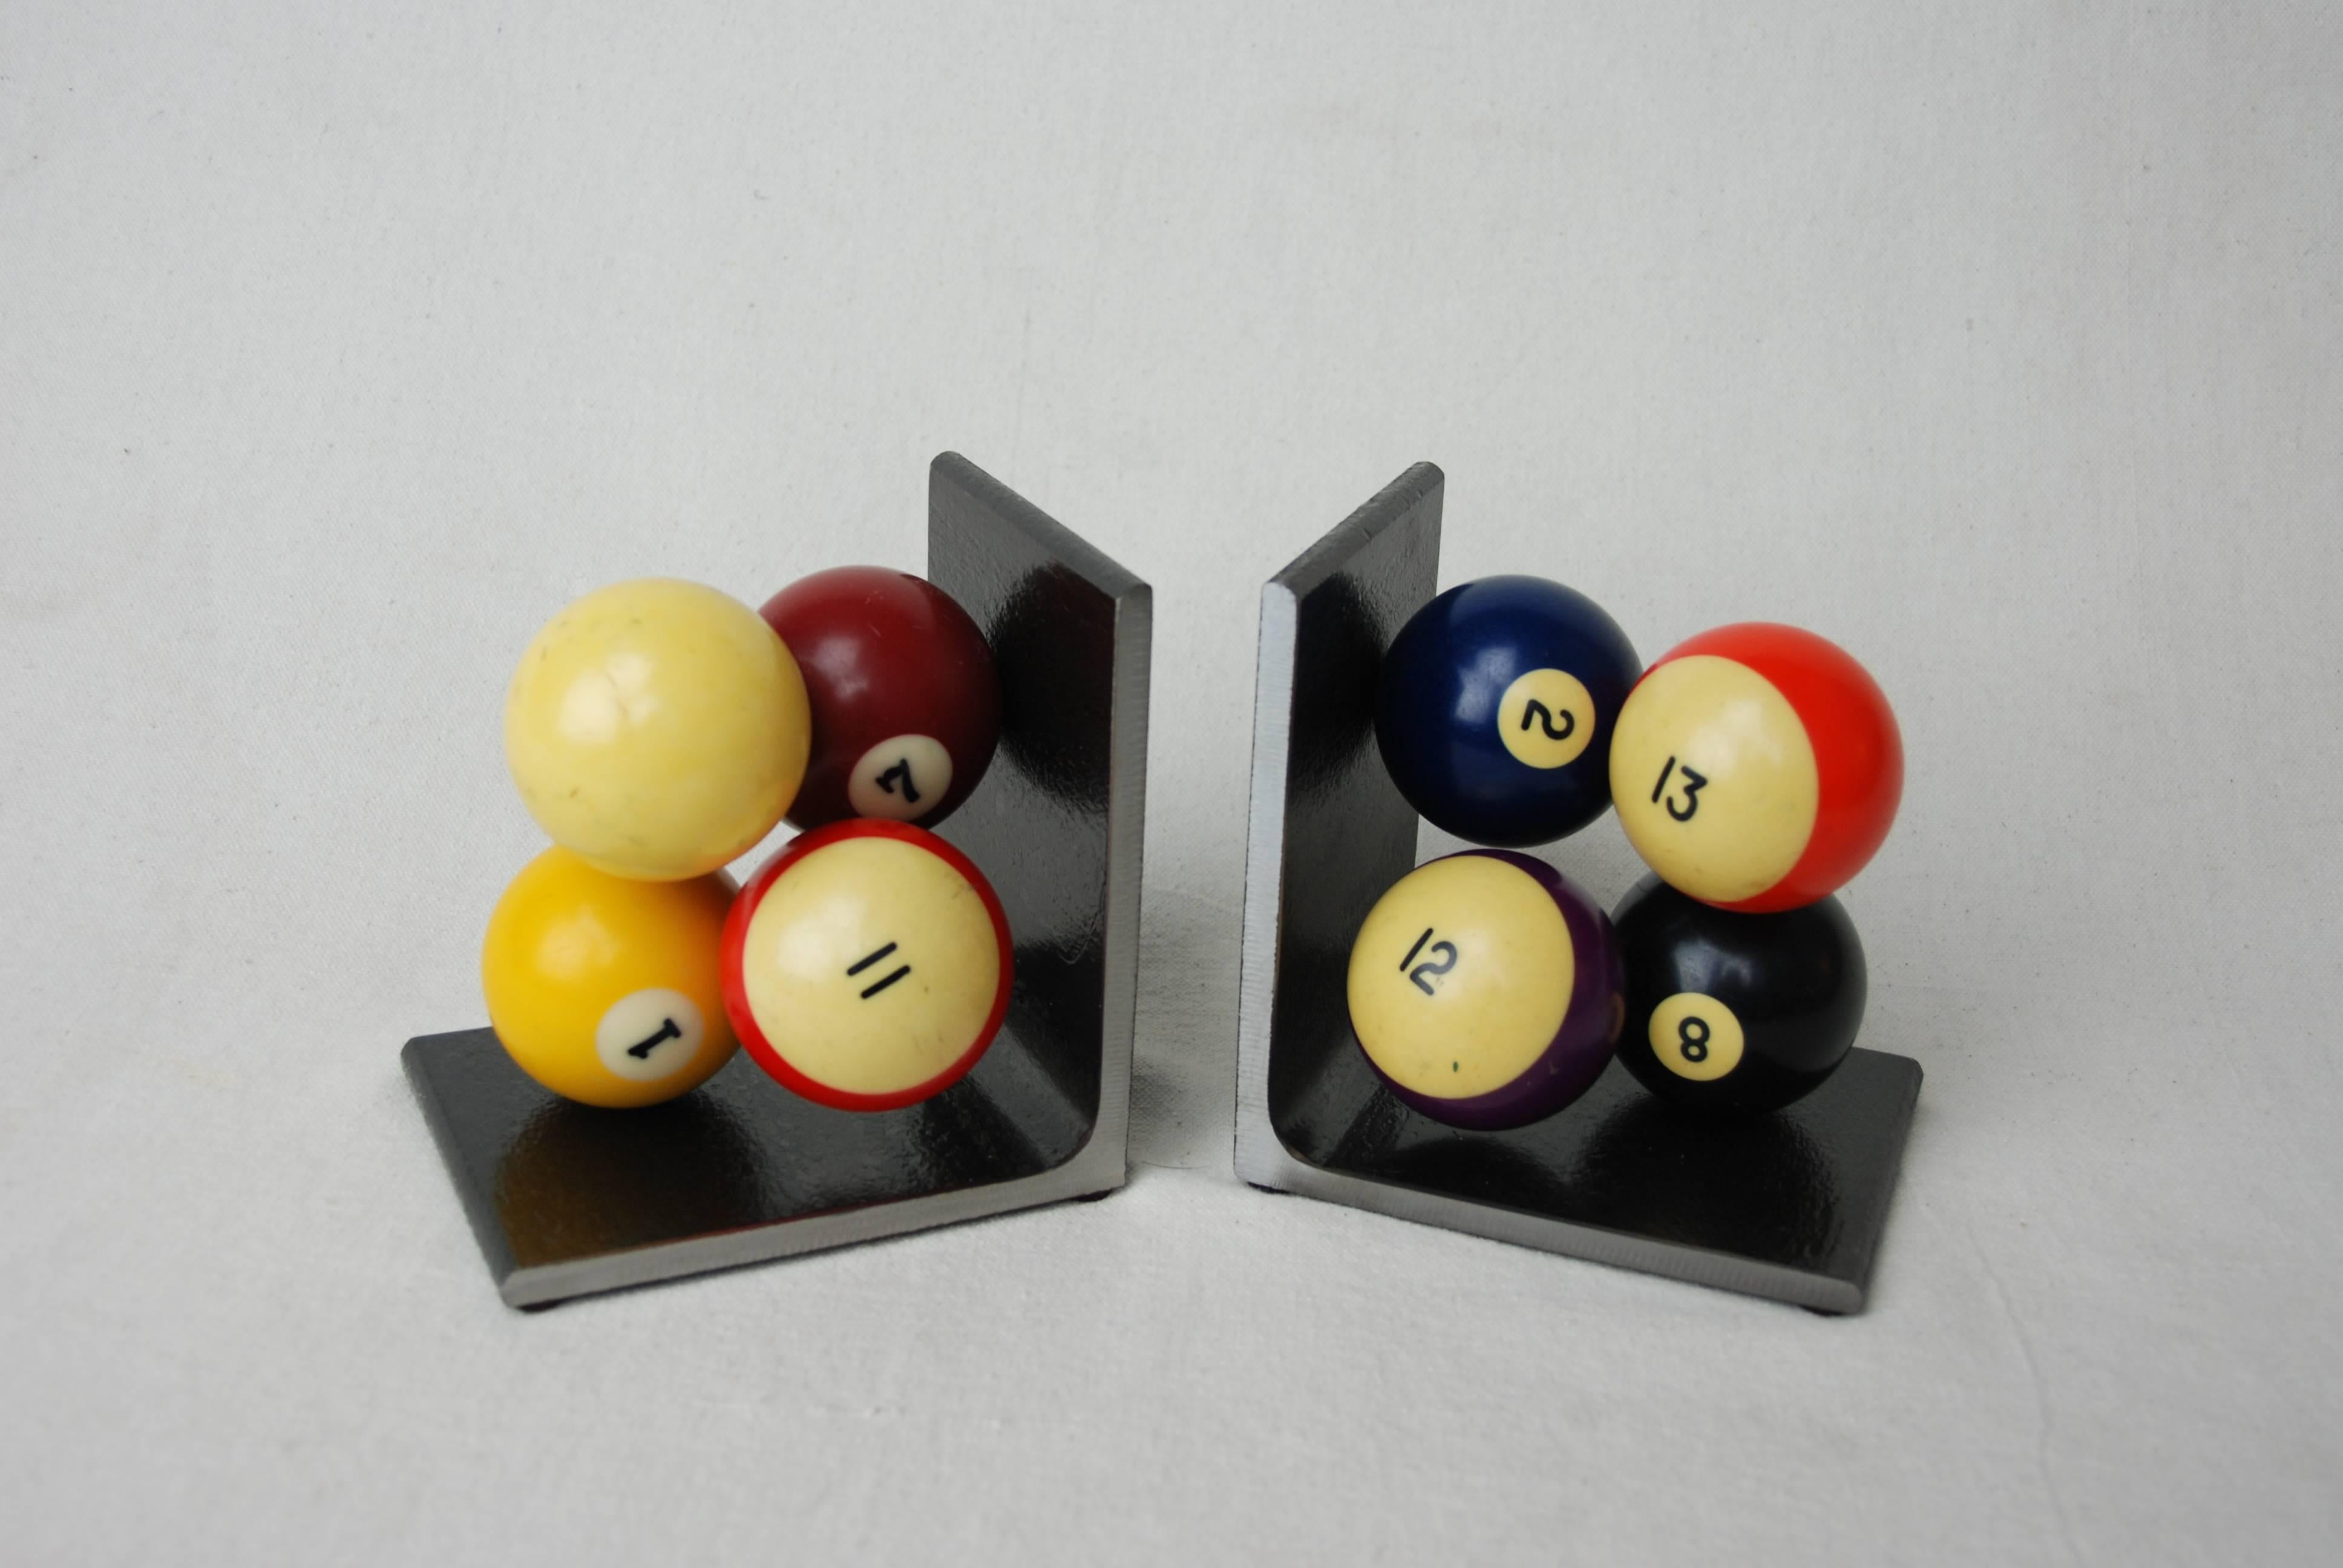 Vintage billiard balls made into bookends by American artist Breck Armstrong. Balls attached to heavy steel base.